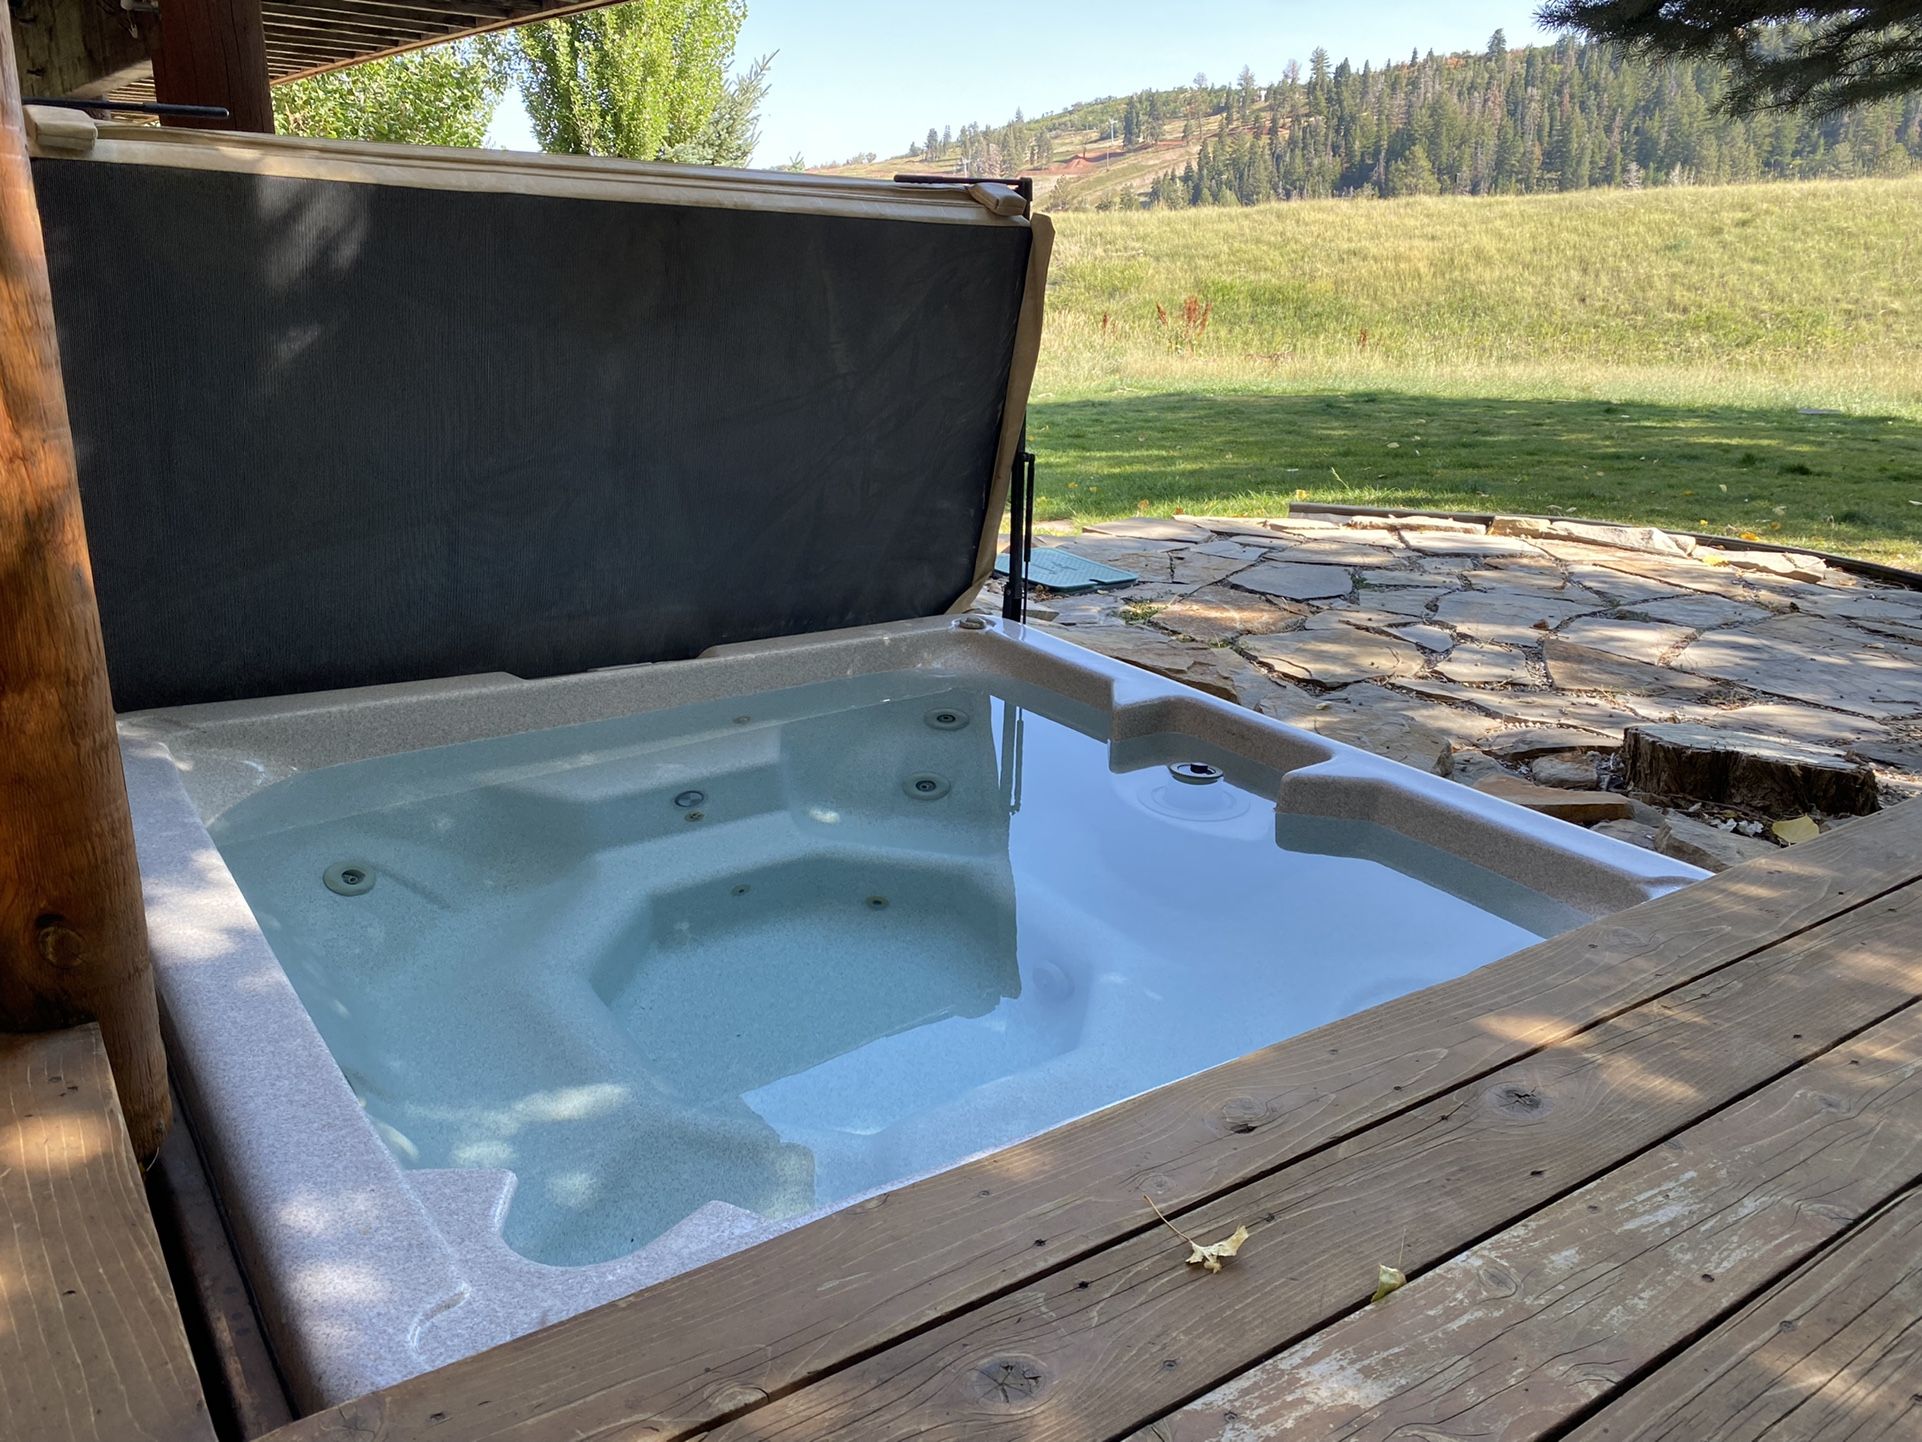 Hot Tub (6-person 350-gallon w/new pump)- works perfectly!